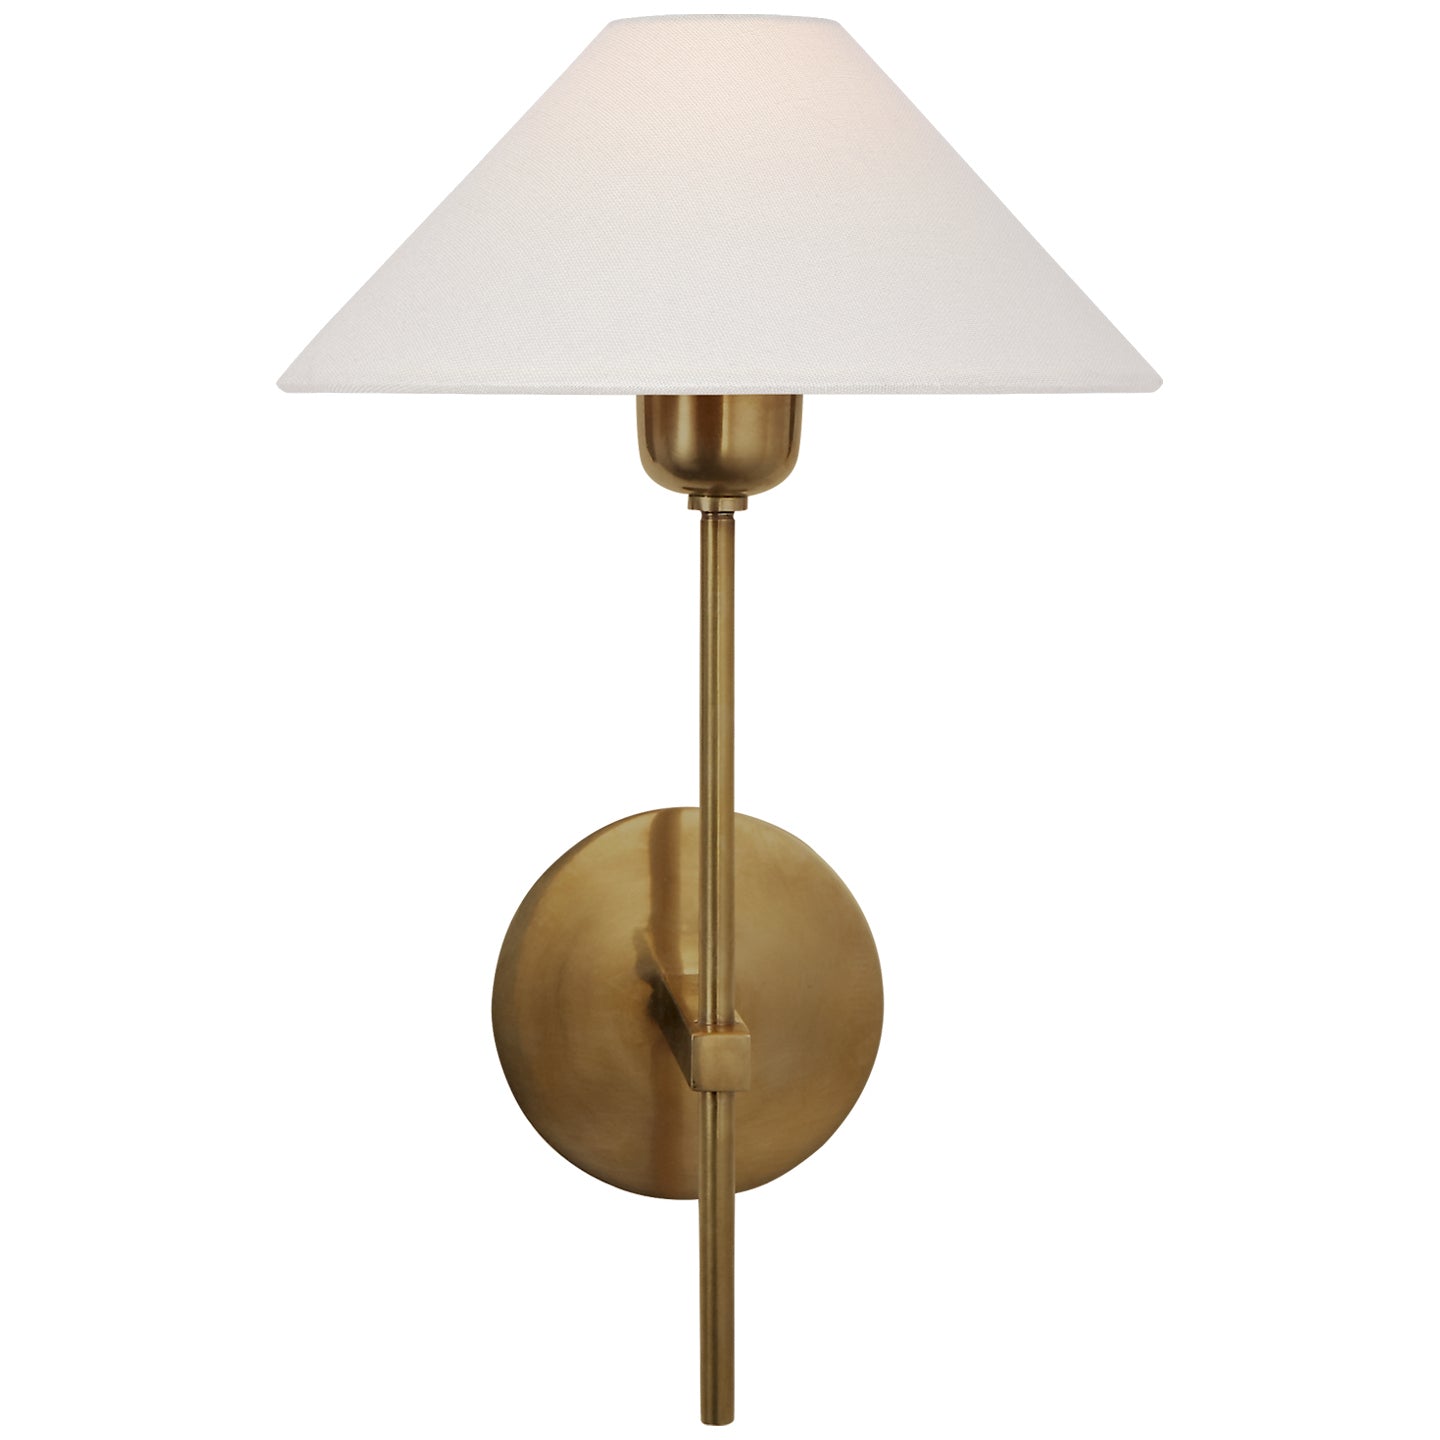 One Light Wall Sconce from the Hackney collection in Hand-Rubbed Antique Brass finish